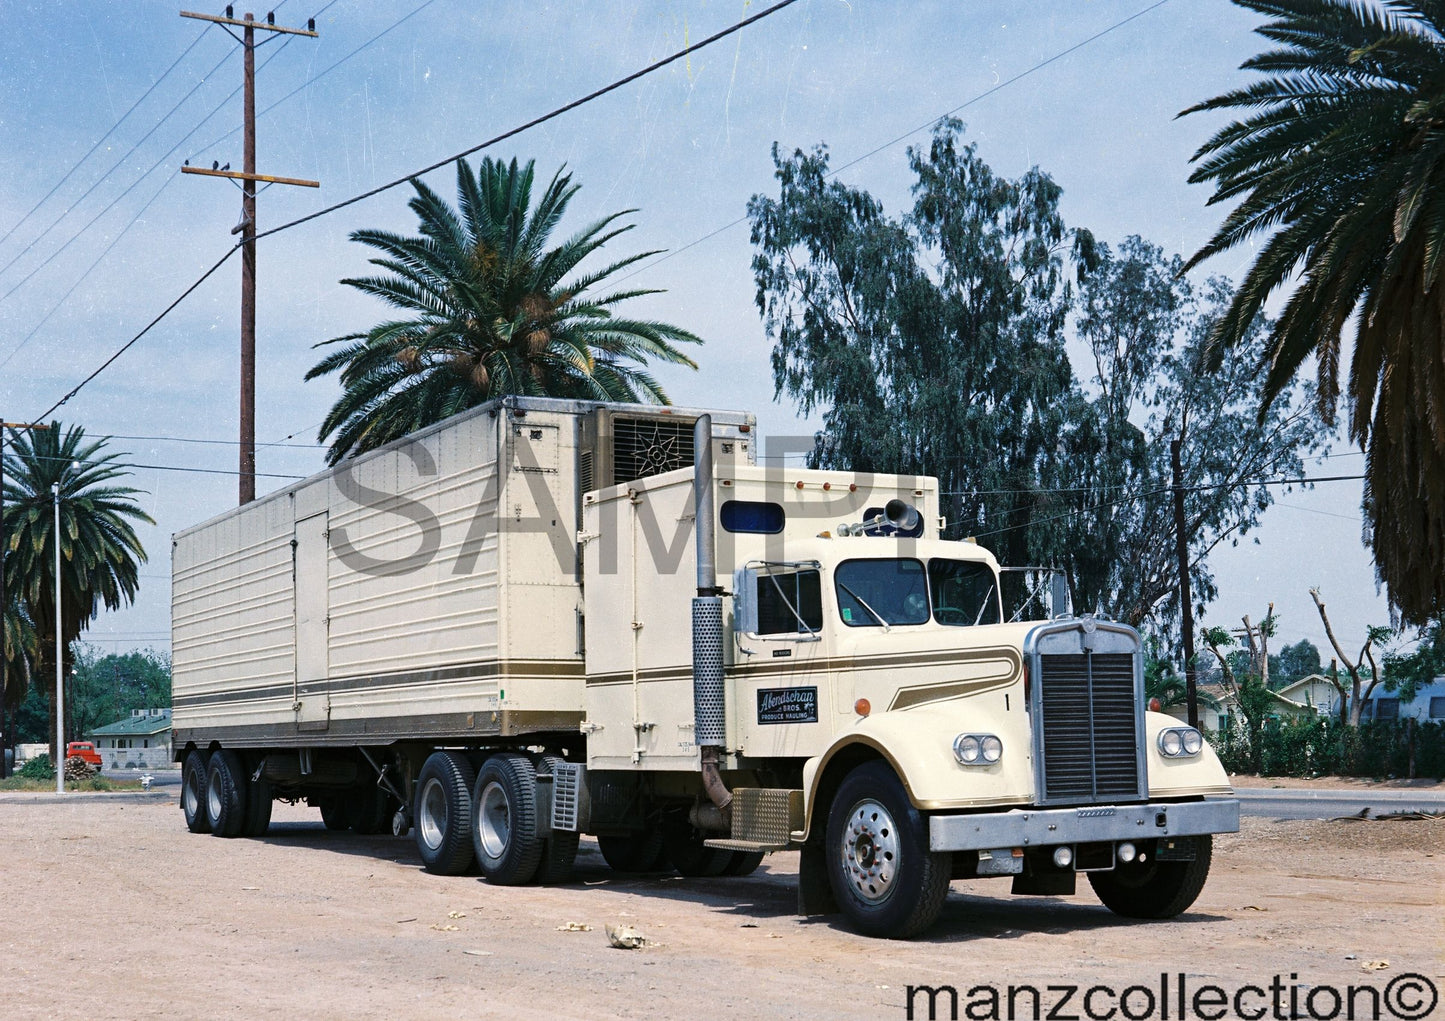 8x10 color semi-truck photo '60's KW conventional ABENDSCHAN BROS PRODUCE HAULING - Transportation Treasure